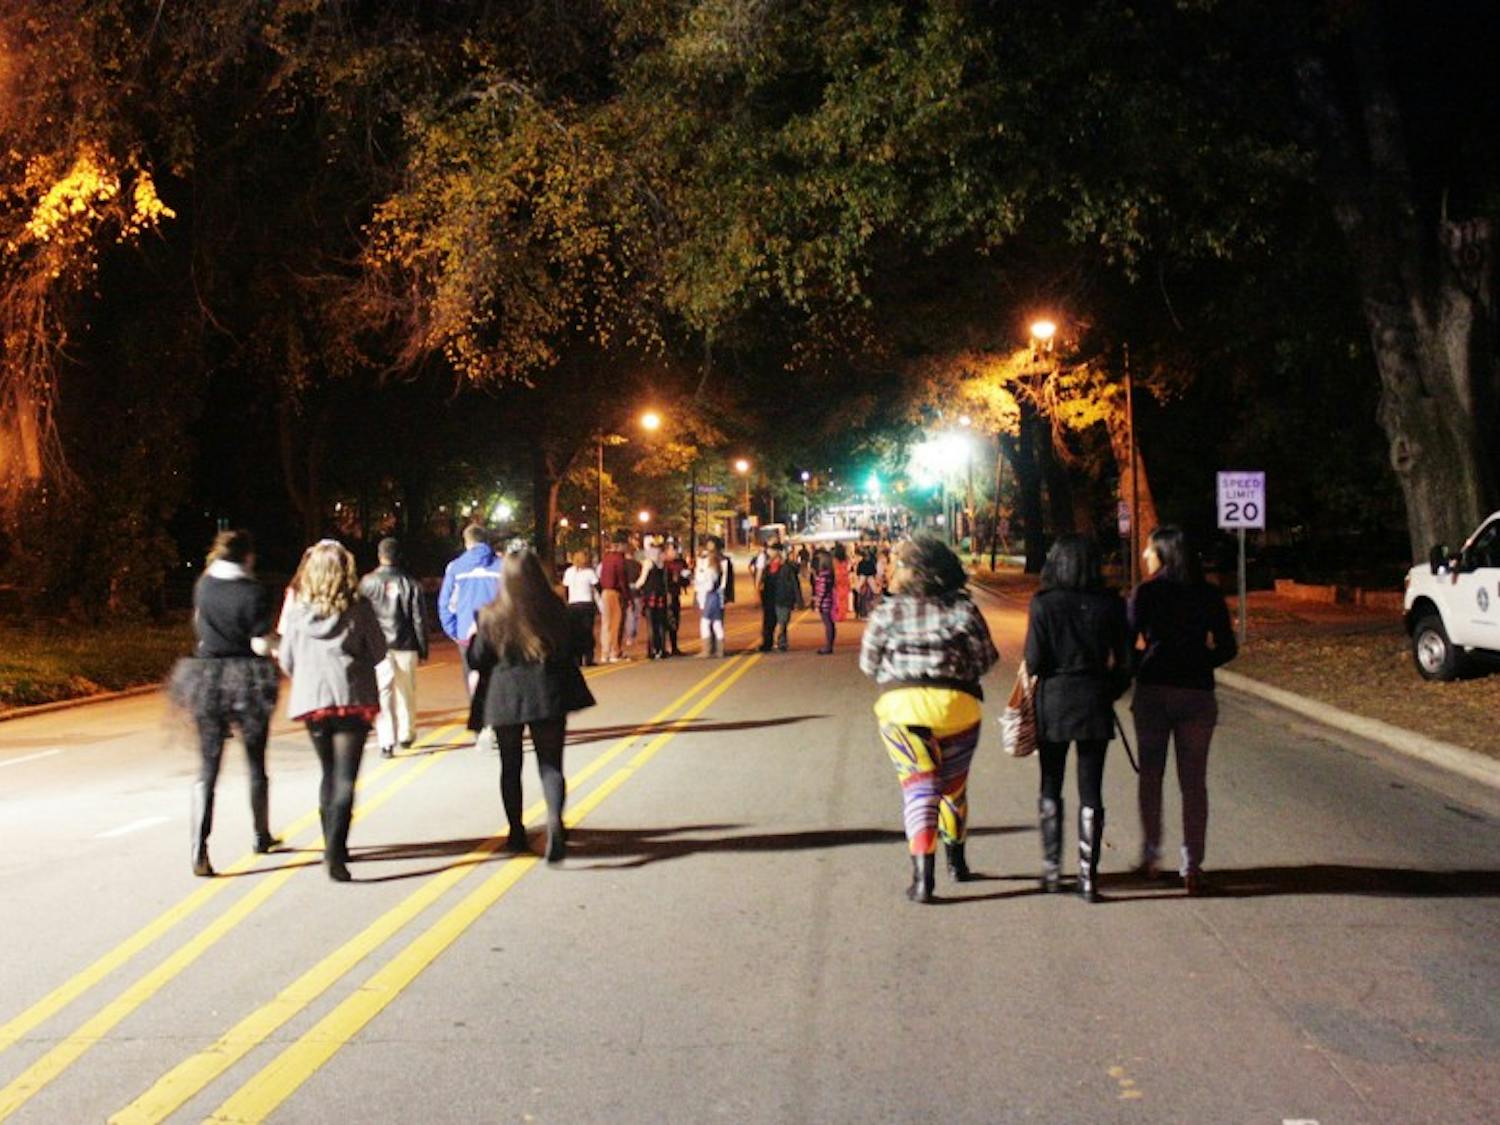 	Students walk along Franklin Street towards the large crowd.